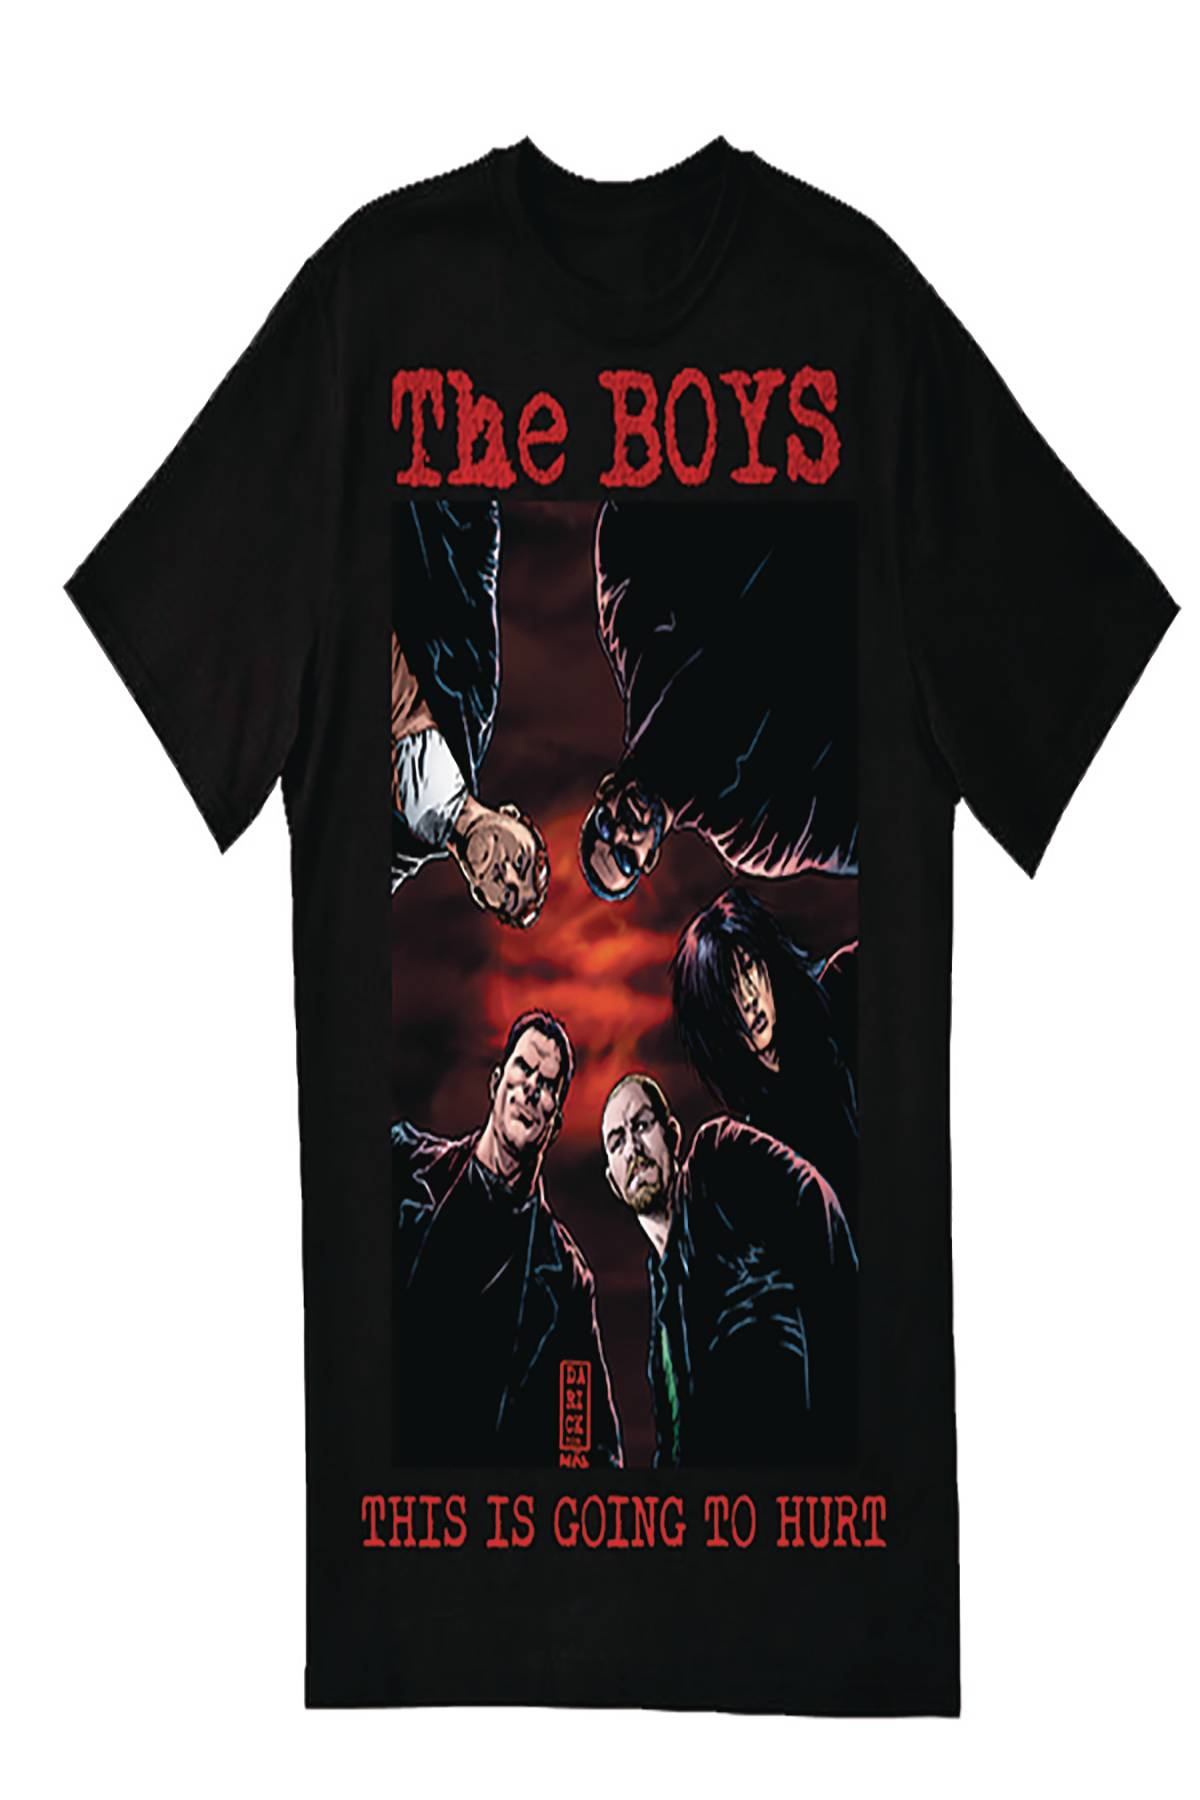 BOYS ISSUE #1 COVER UNISEX T/S XL